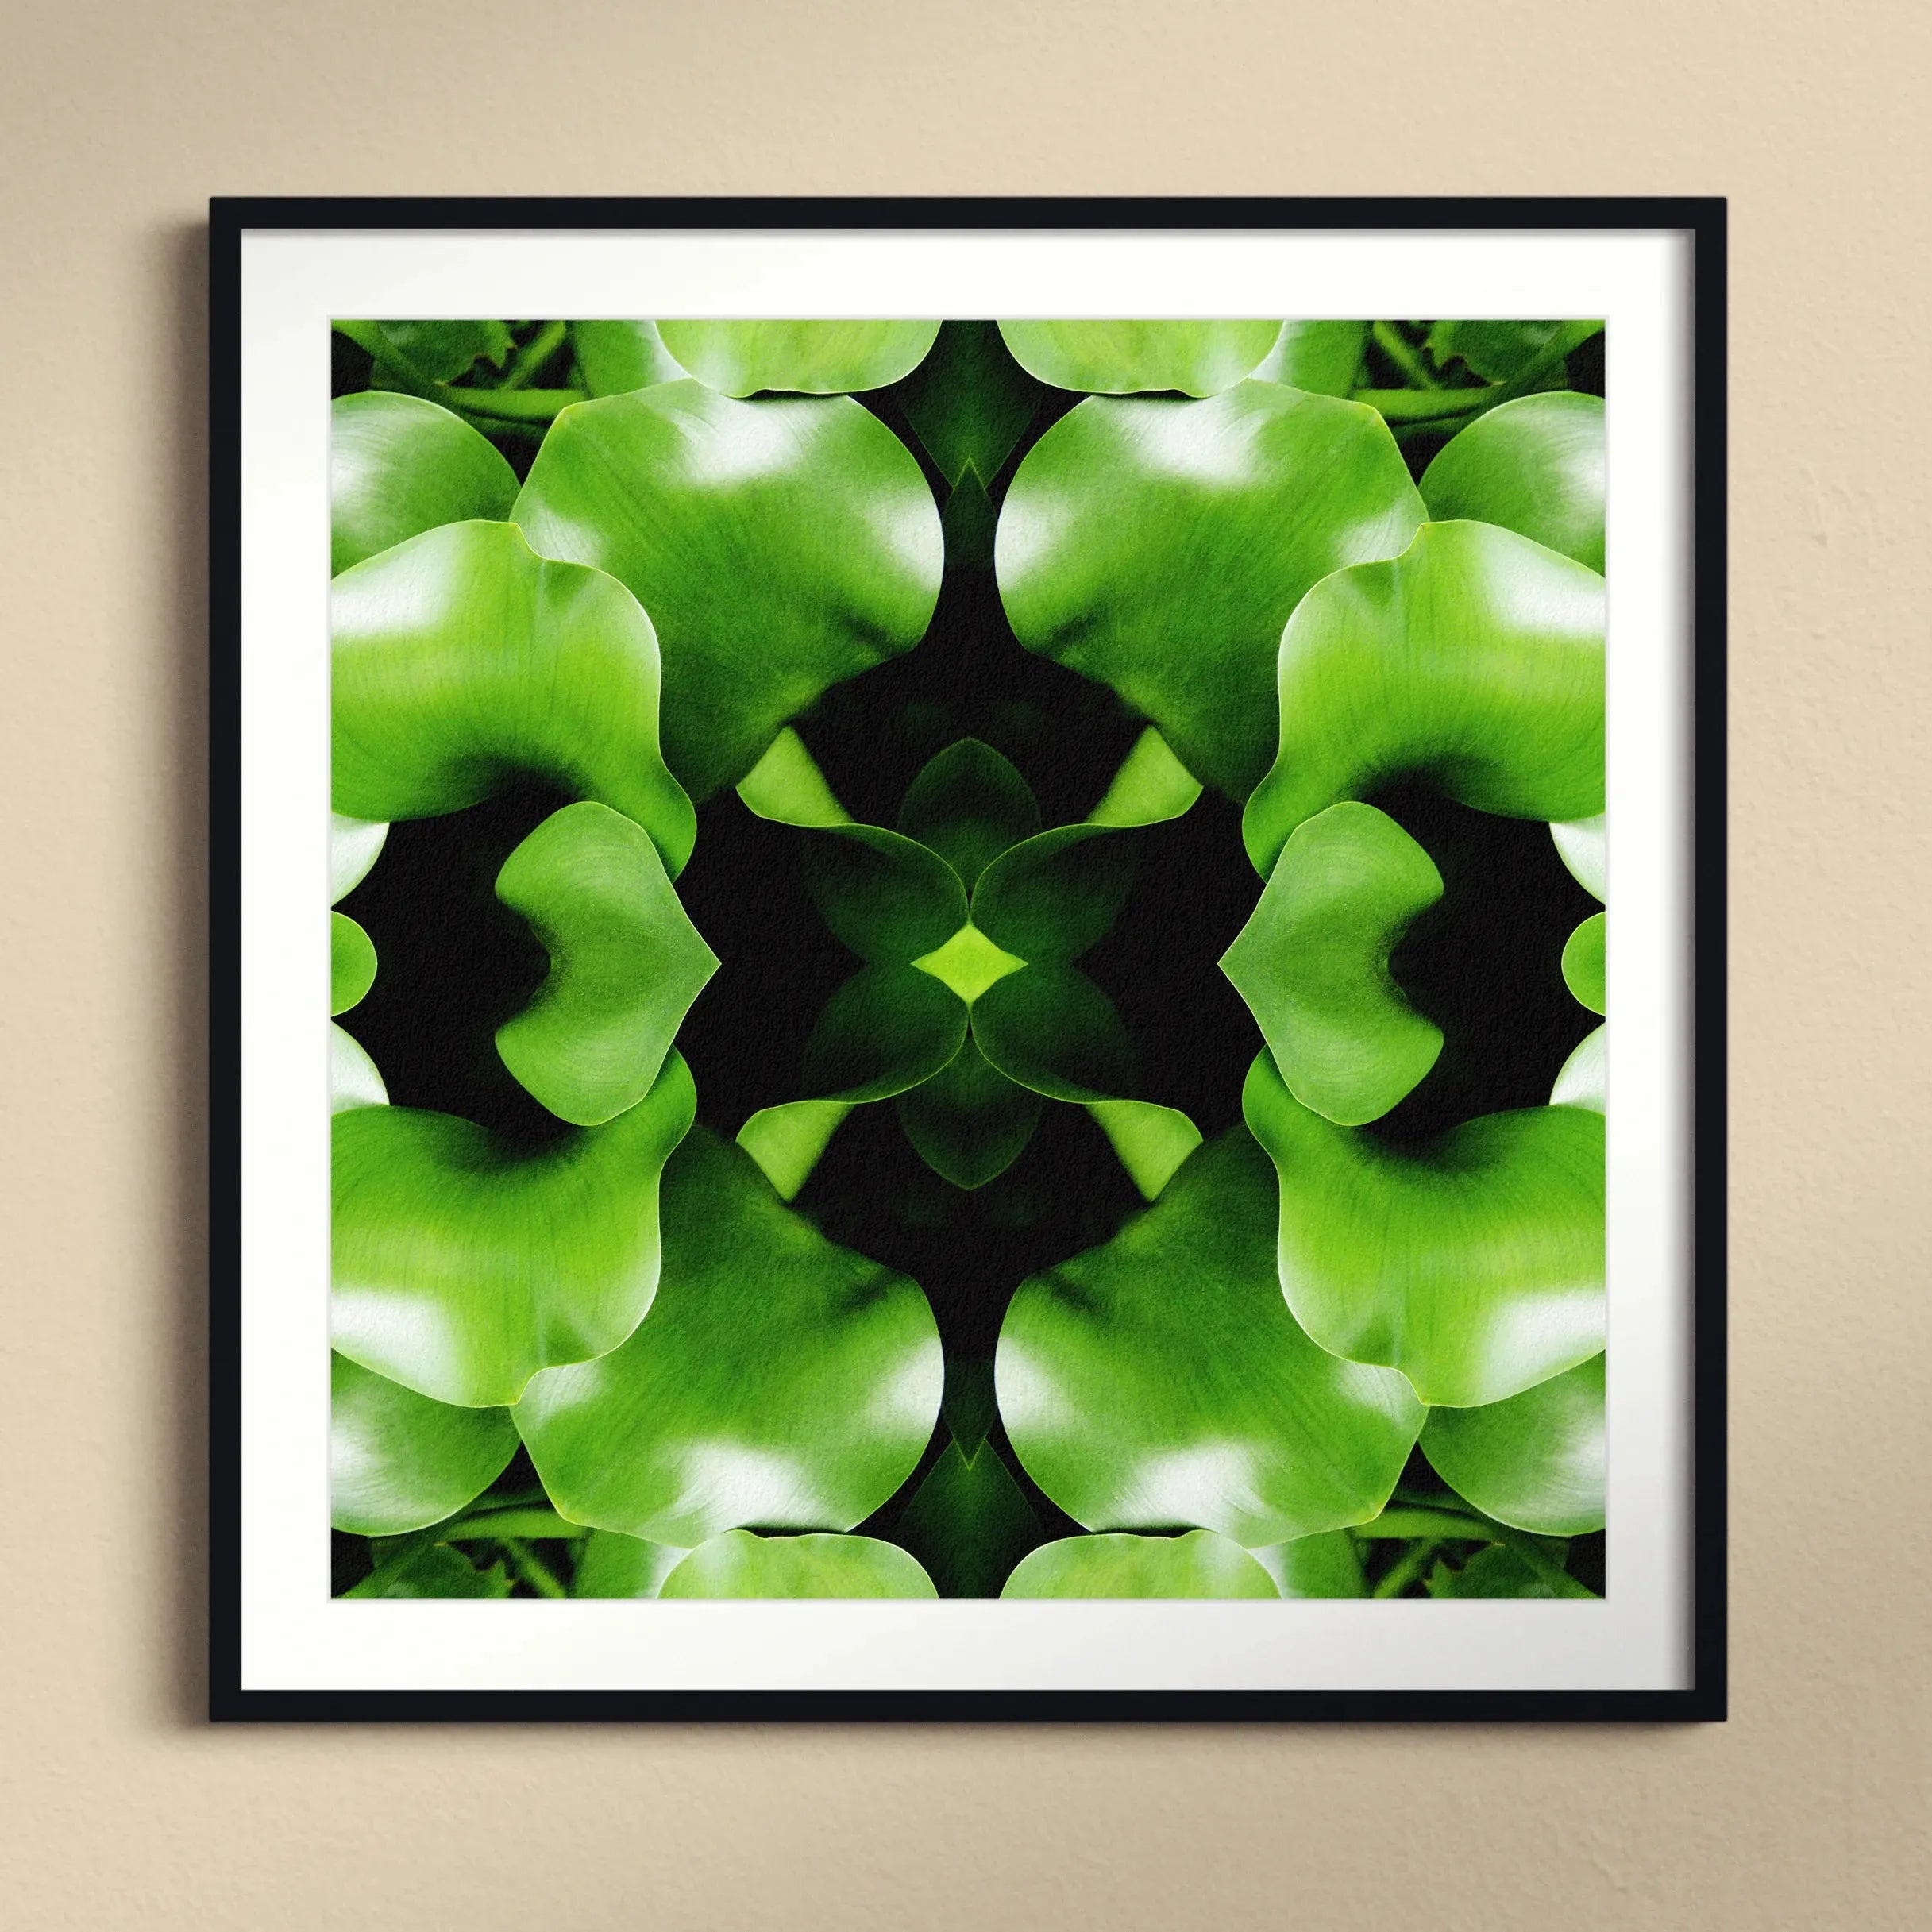 Take Me To Your Leader Framed & Mounted Print - Posters Prints & Visual Artwork - Aesthetic Art